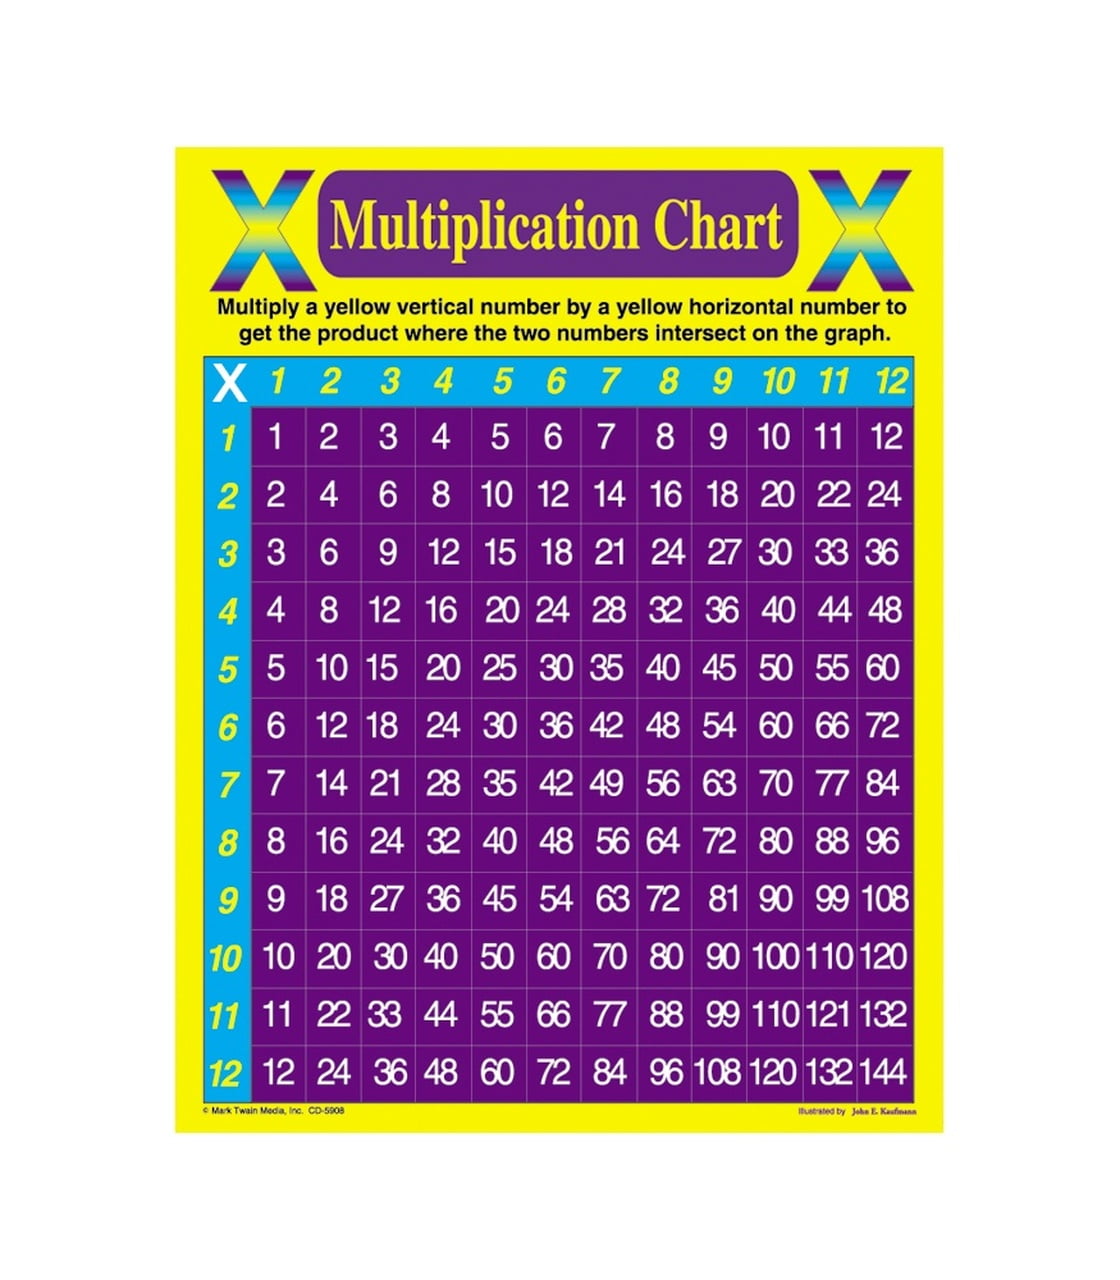 4 Multiplication Chart Multiplication Table Chart Multiplying By 4 